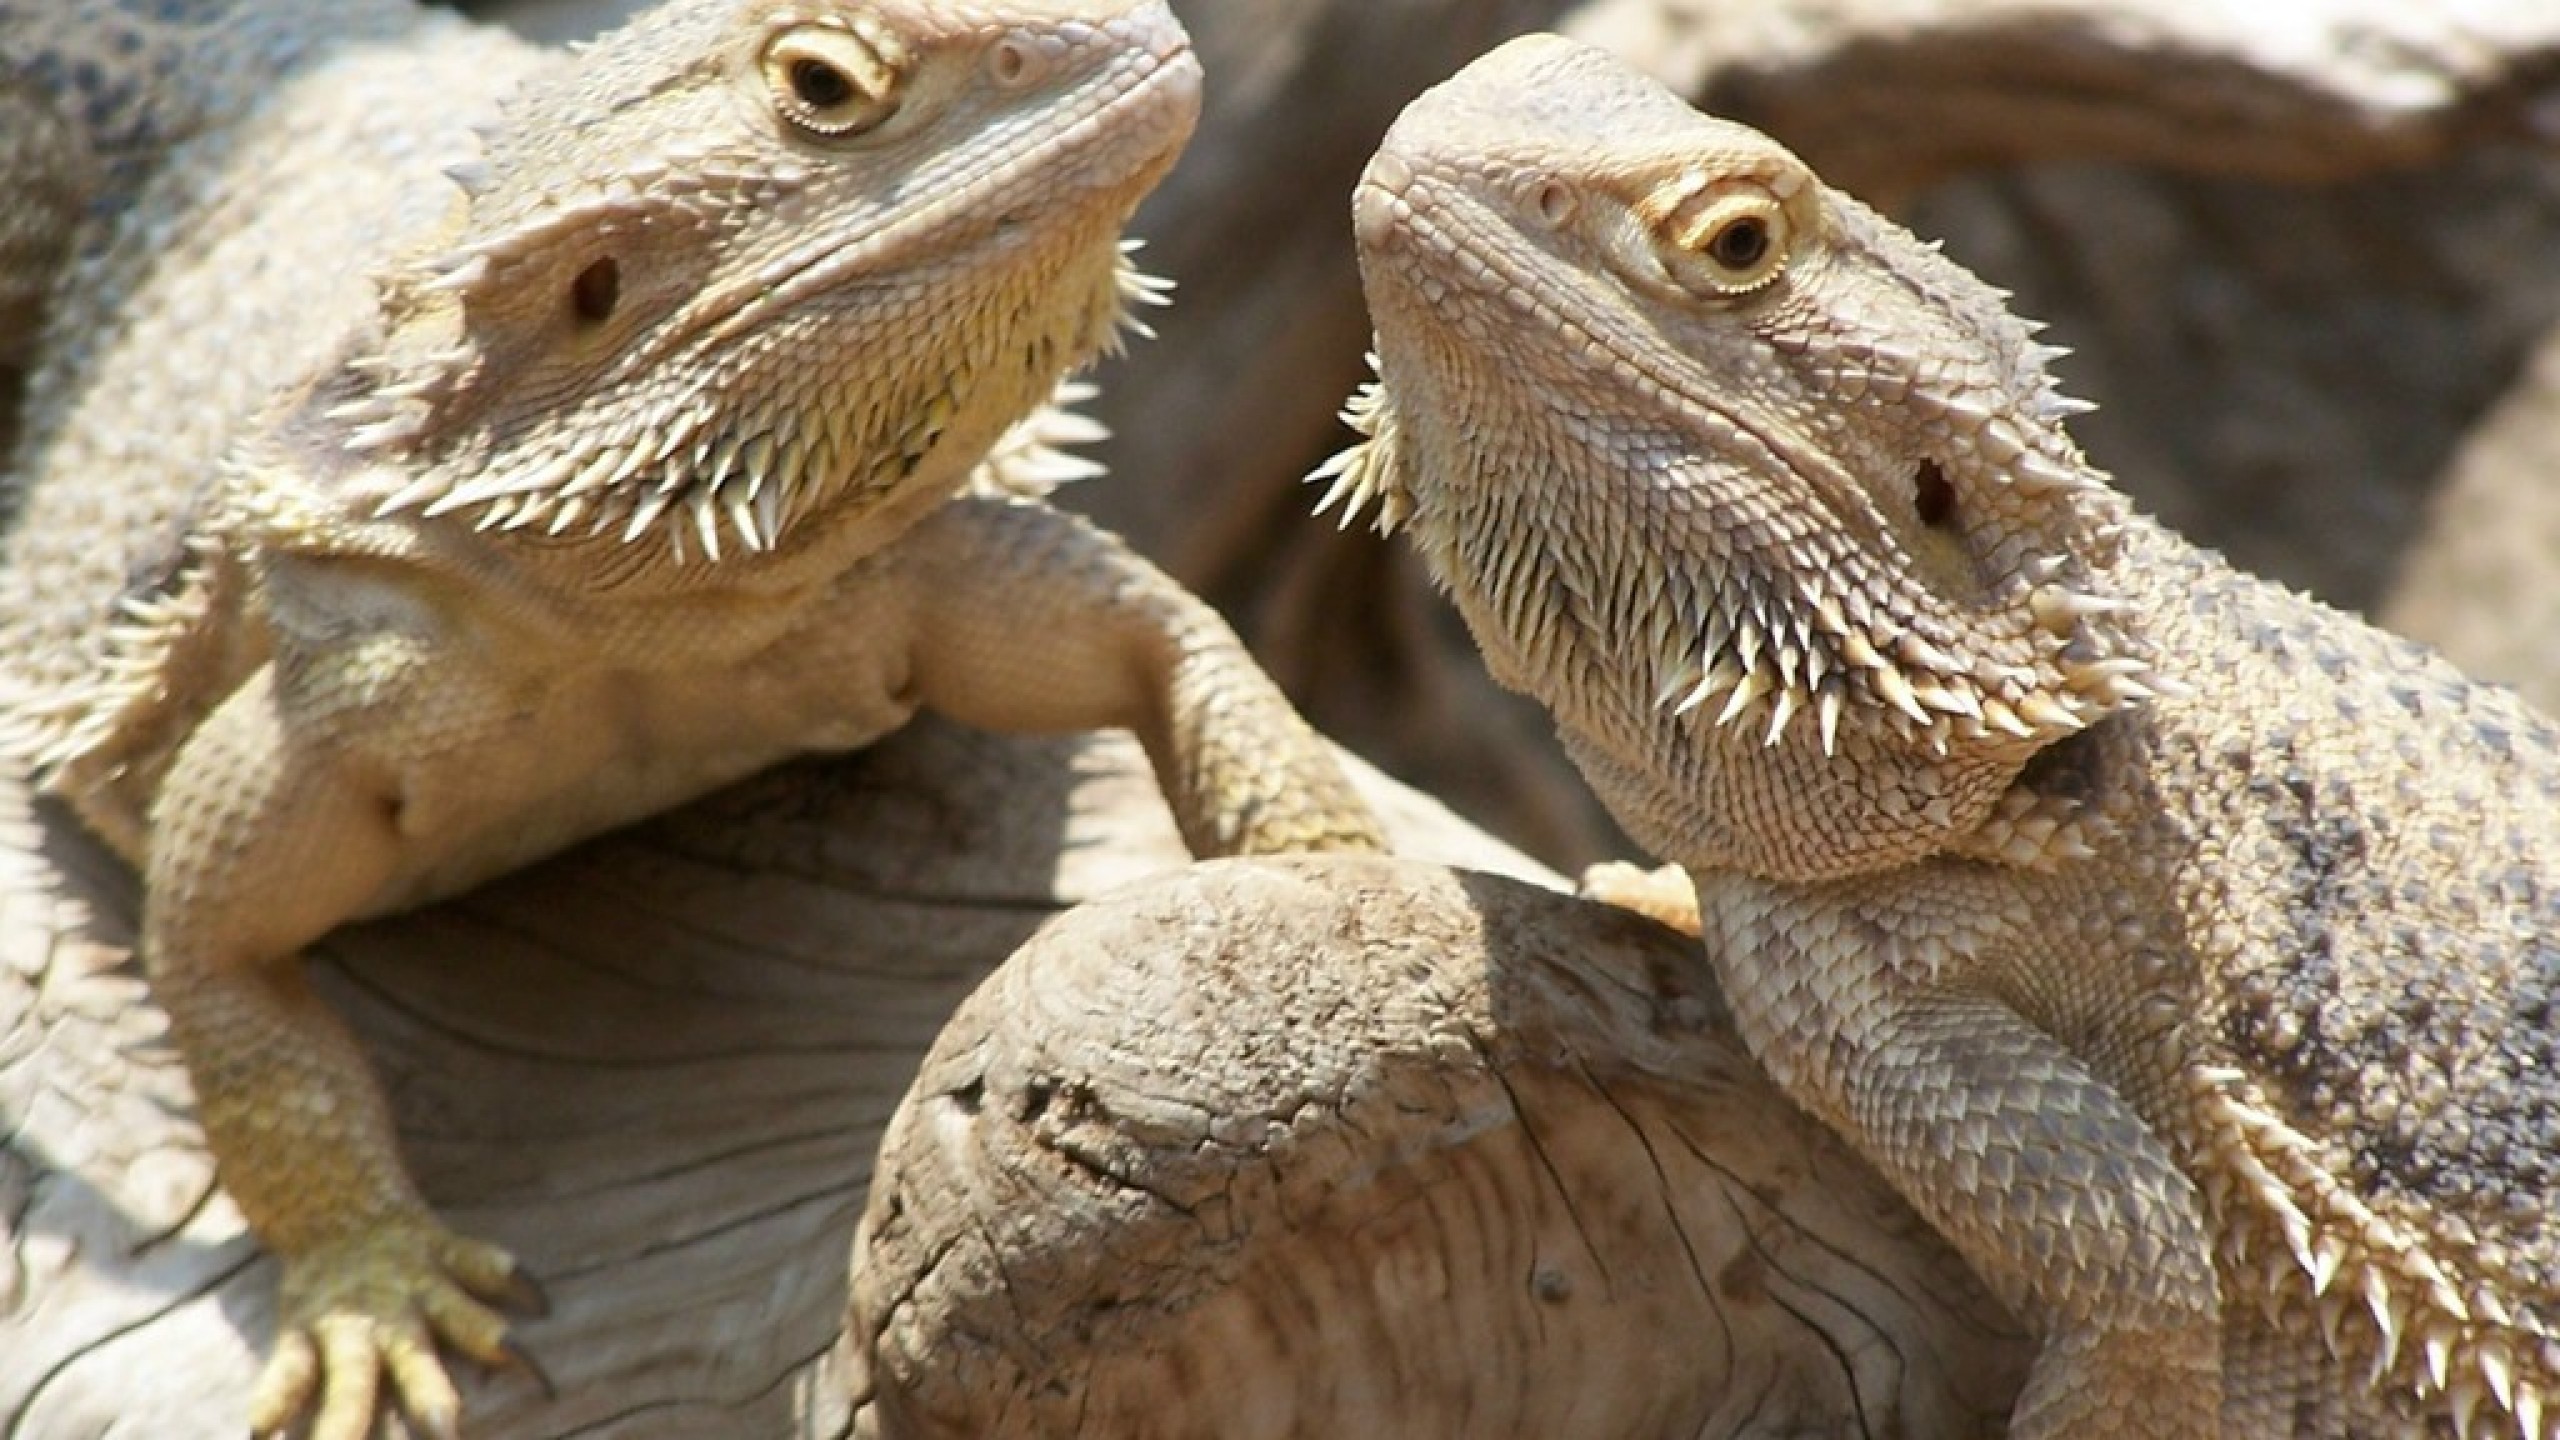 Bearded Dragons Images Bearded Dragons Hd Wallpaper - Two Bearded Dragon - HD Wallpaper 